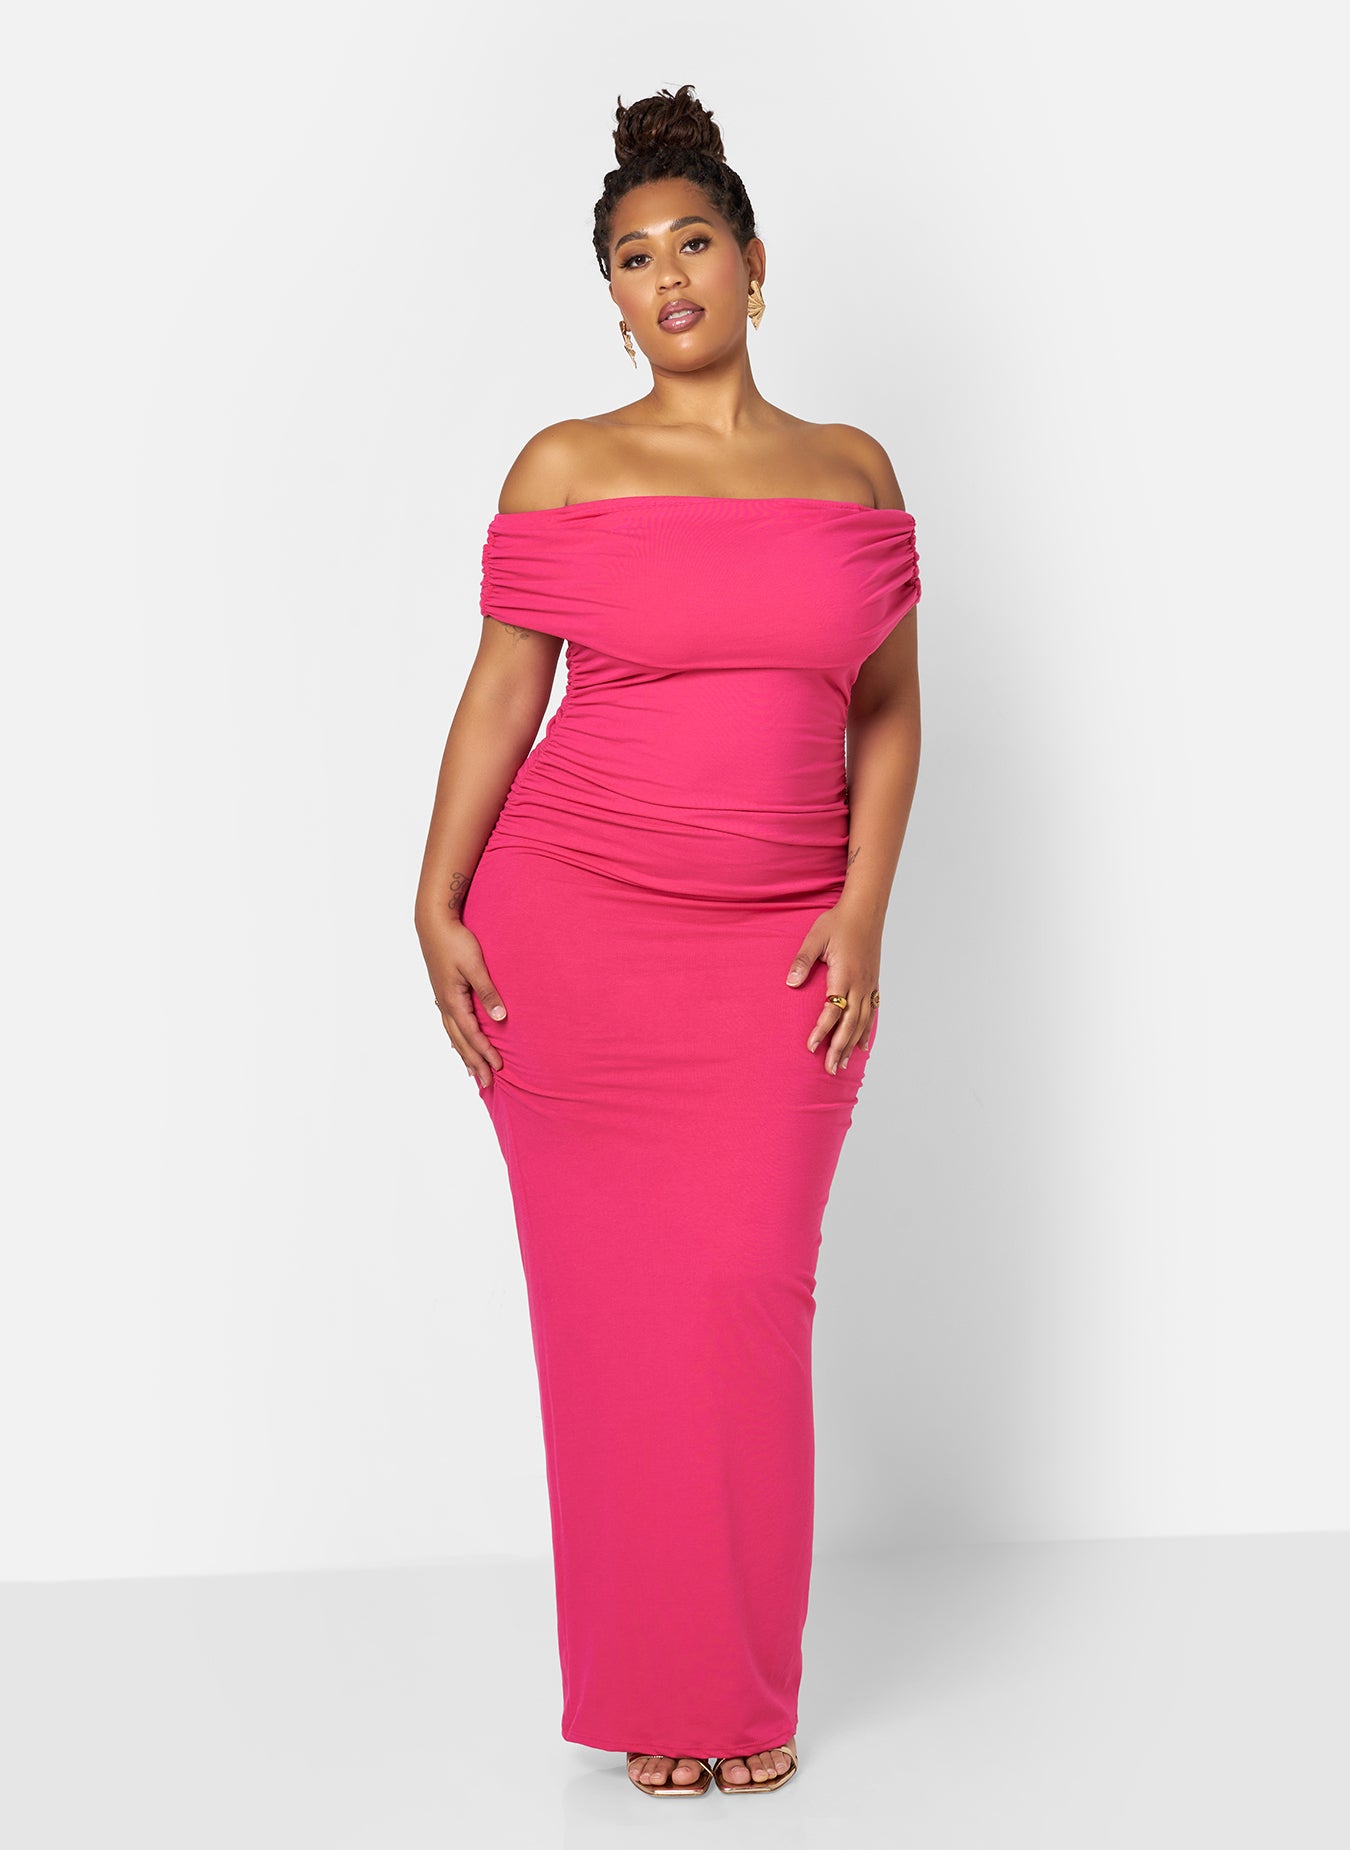 Analise Cotton Over The Shoulder BodyconMaxi Dress